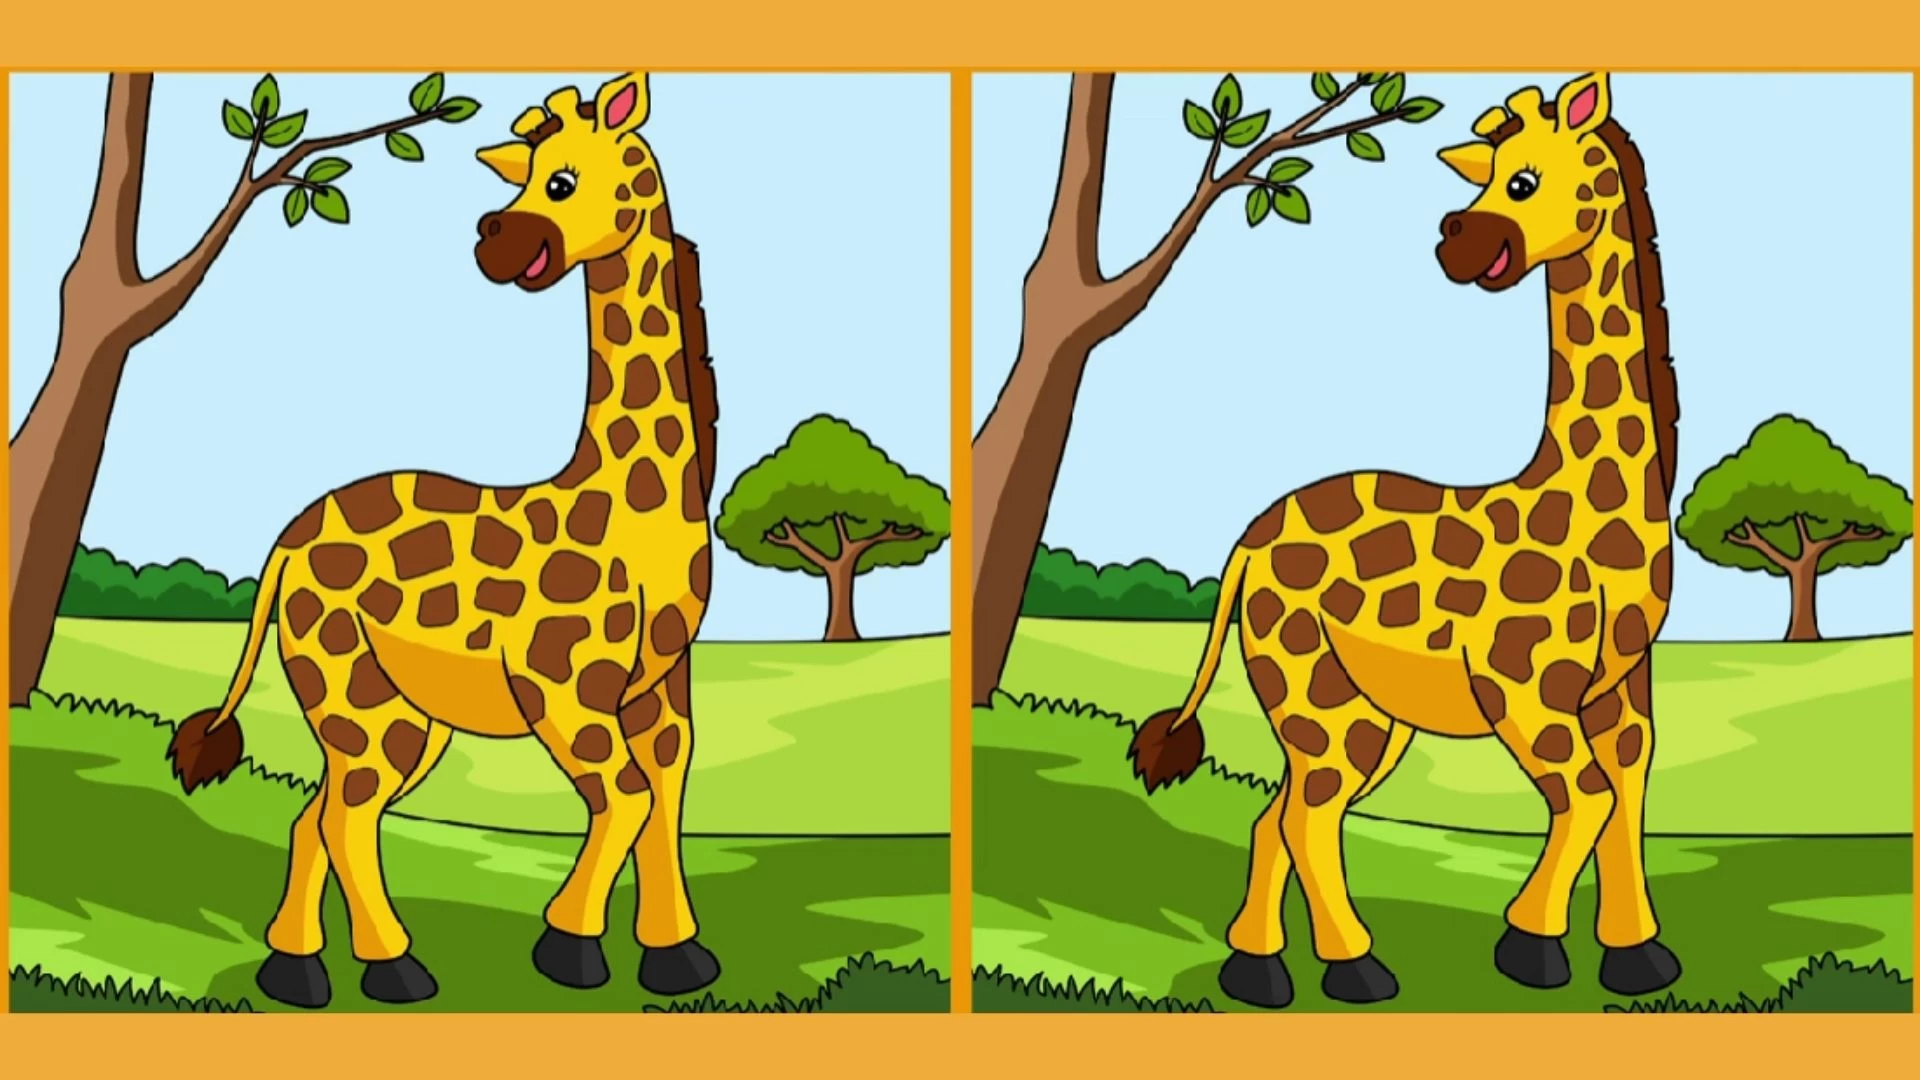 Only true observers will be able to spot 3 differences in the Giraffe picture within 12 seconds